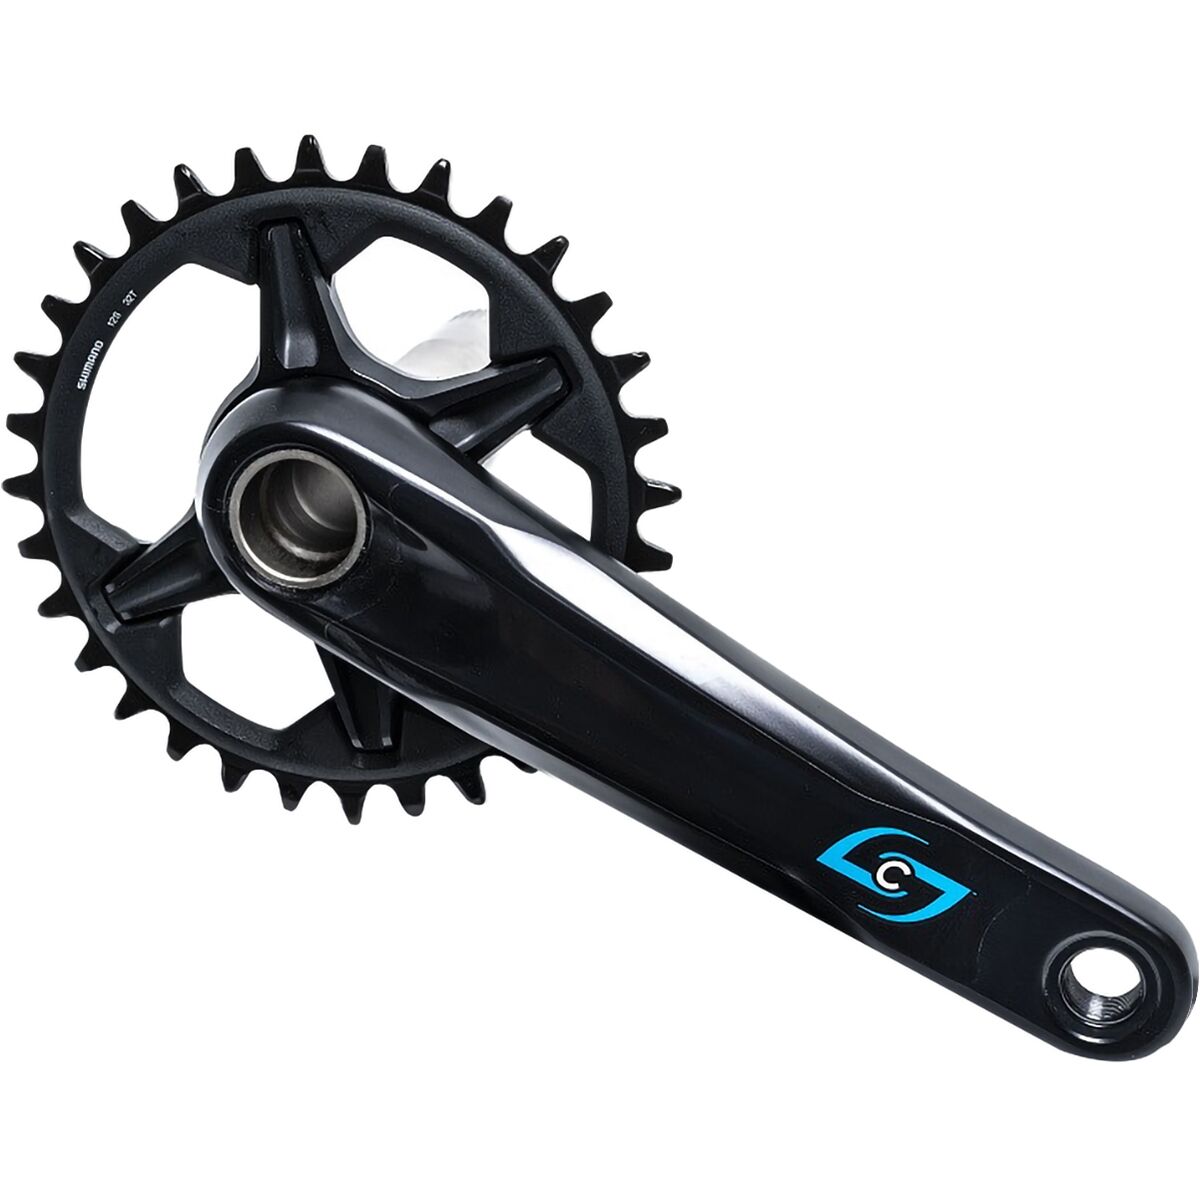 Stages Cycling Shimano XT M8120 Gen 3 Dual-Sided Power Meter